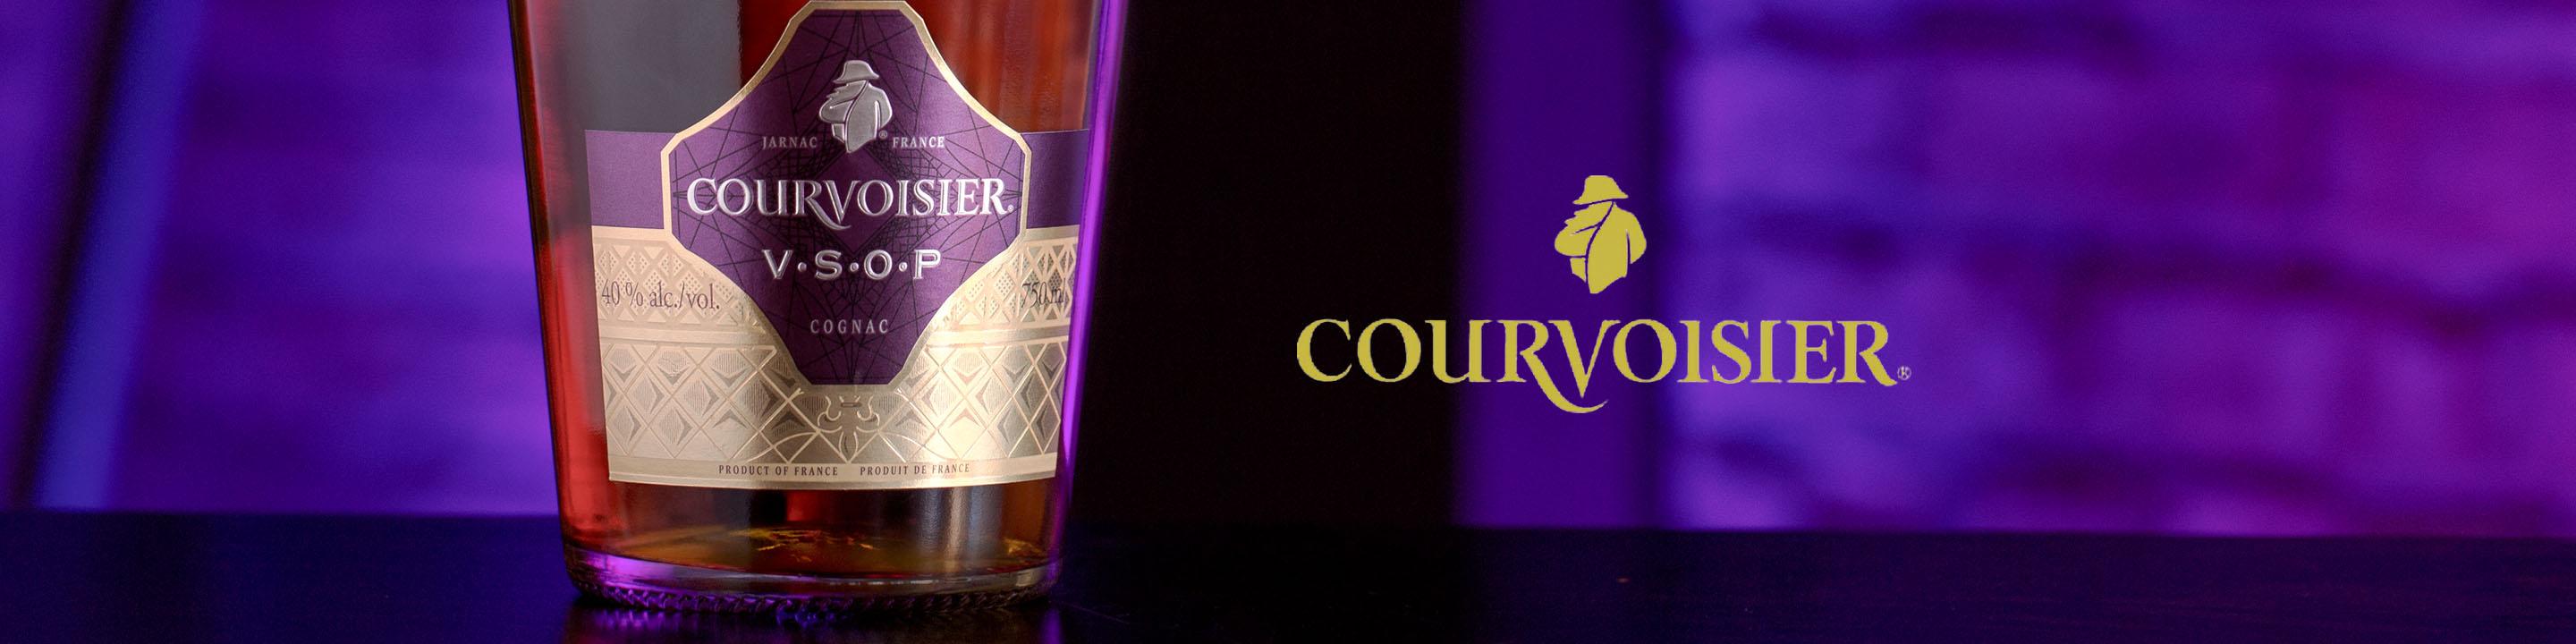 Since its creation in 1809, Courvoisier® has crafted cognac to be rich and sophisticated to ignite the senses and give reason to celebrate. Inspired by innovation, ingenuity and elegance. 

Buy Courvoisier online now from nearby liquor stores via Minibar Delivery.